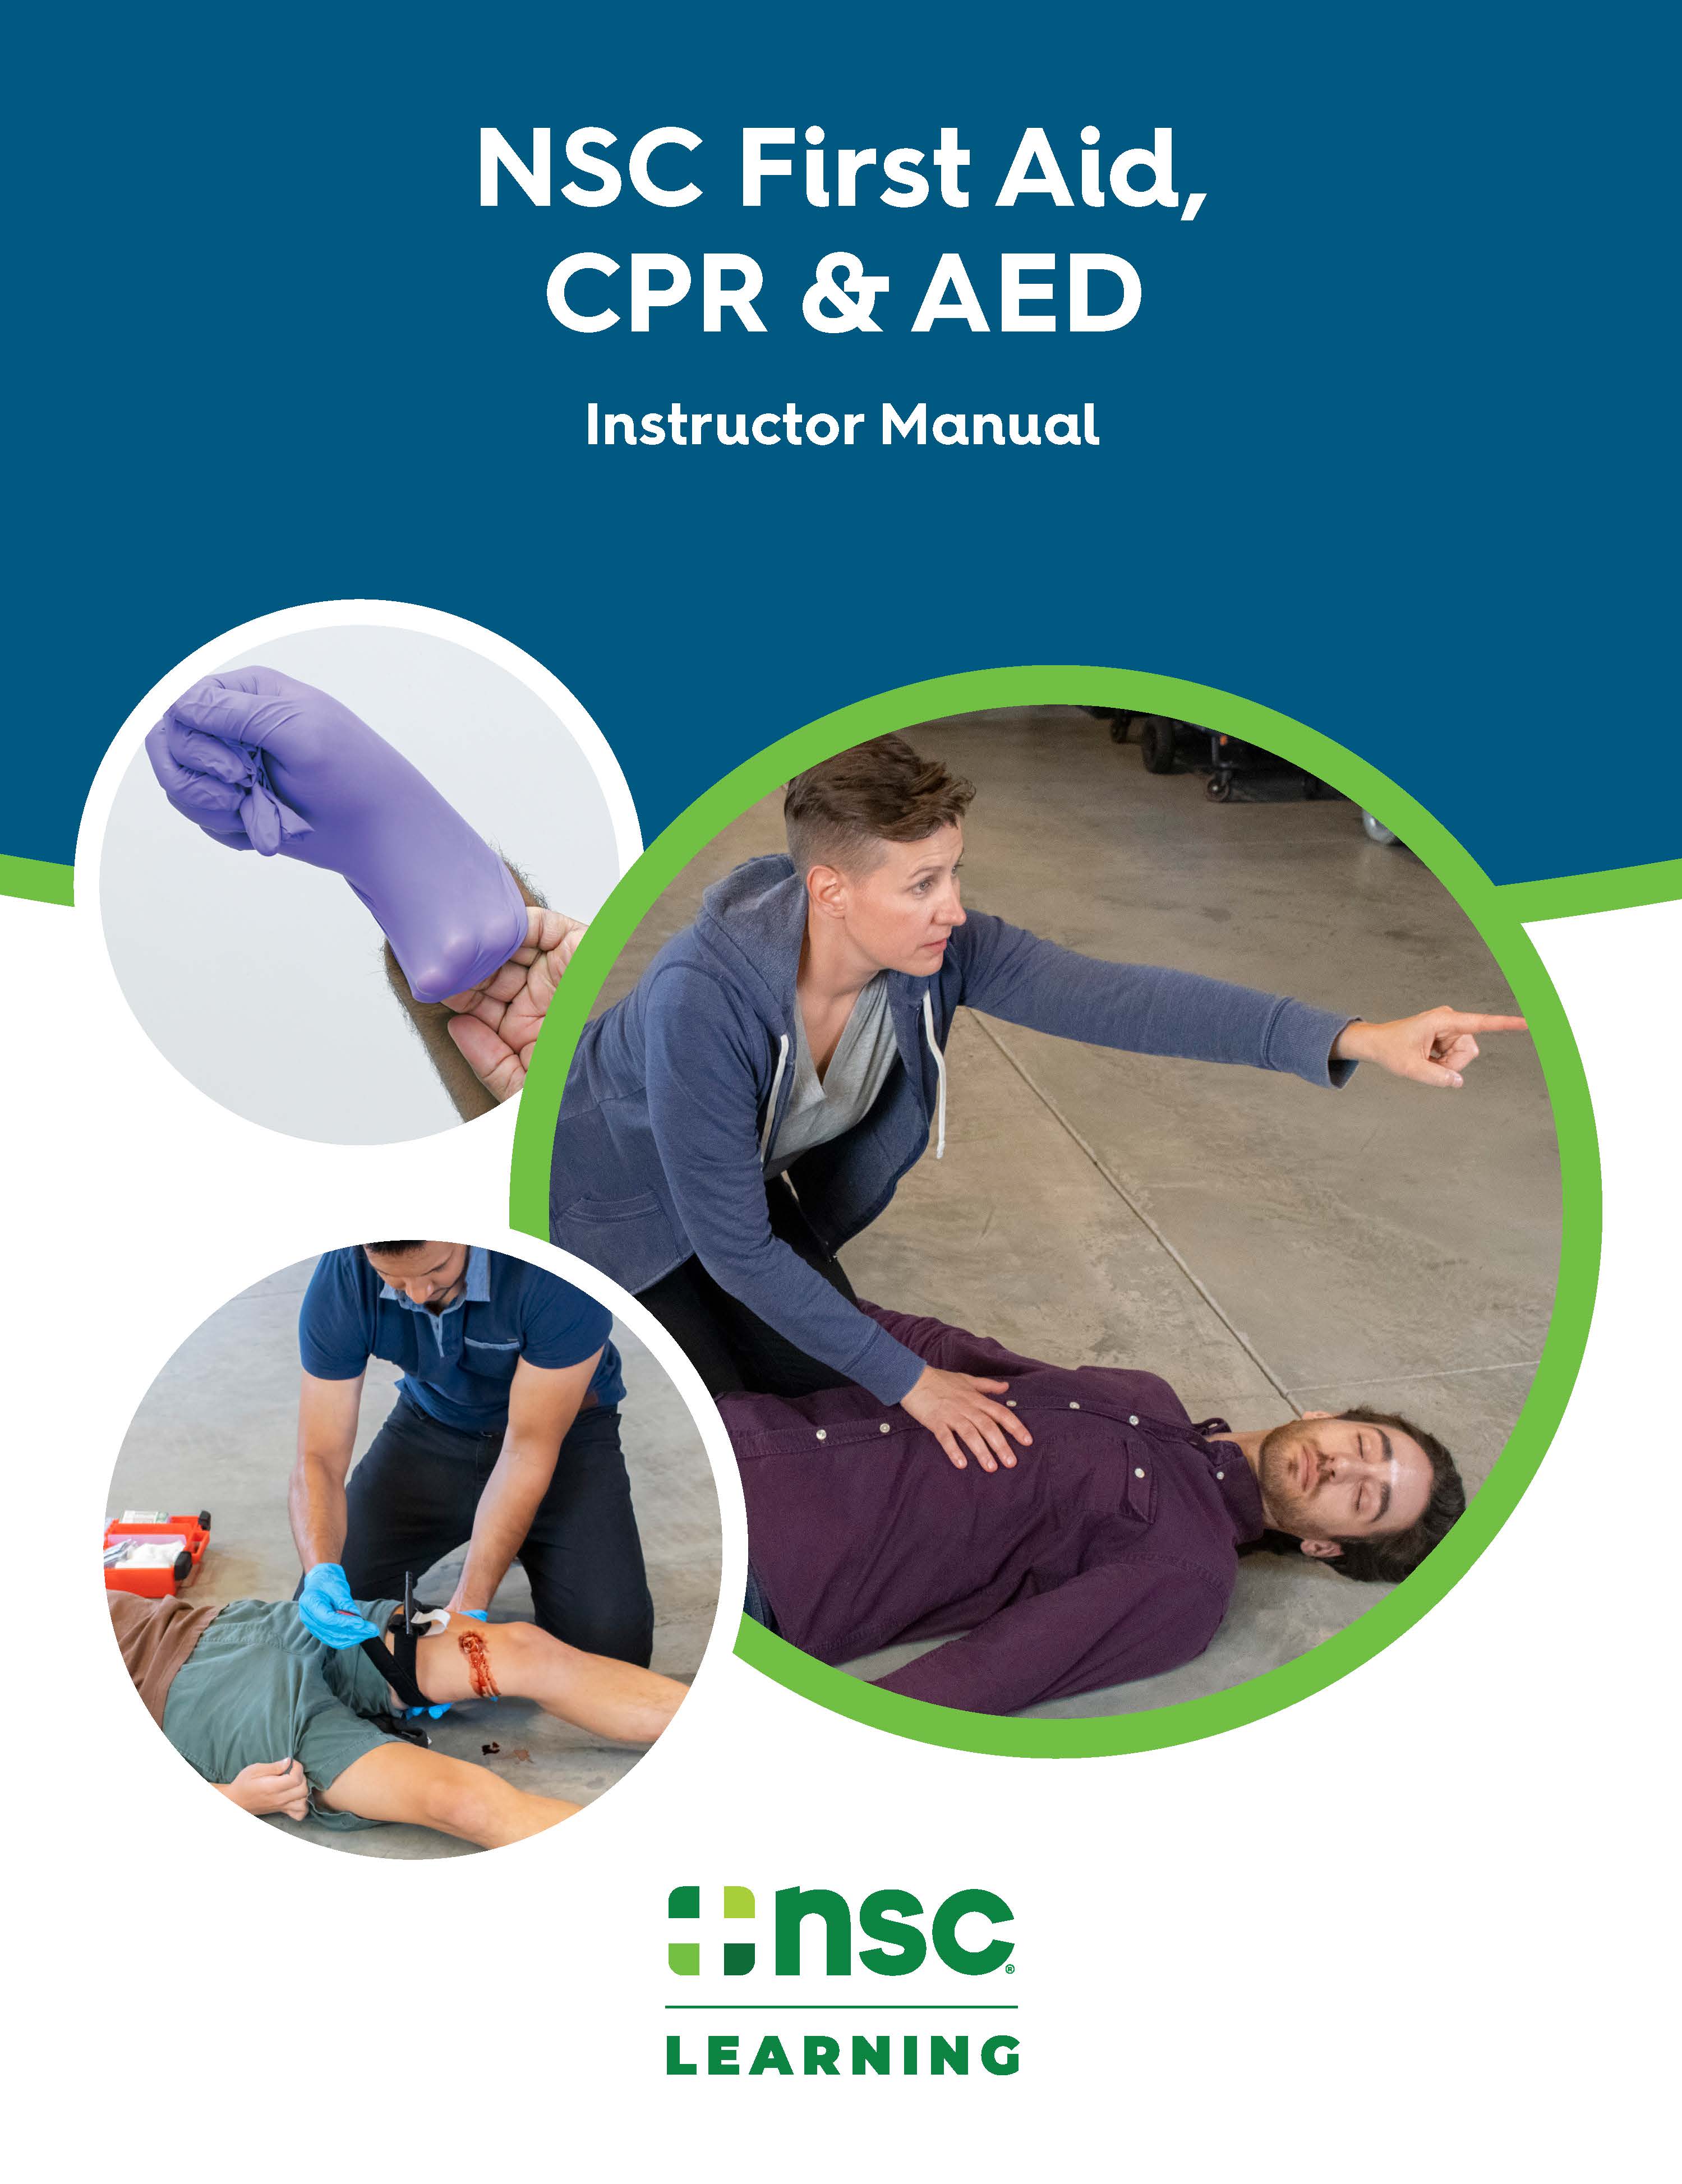 NSC First Aid, CPR, & AED eInstructor Resource Kit